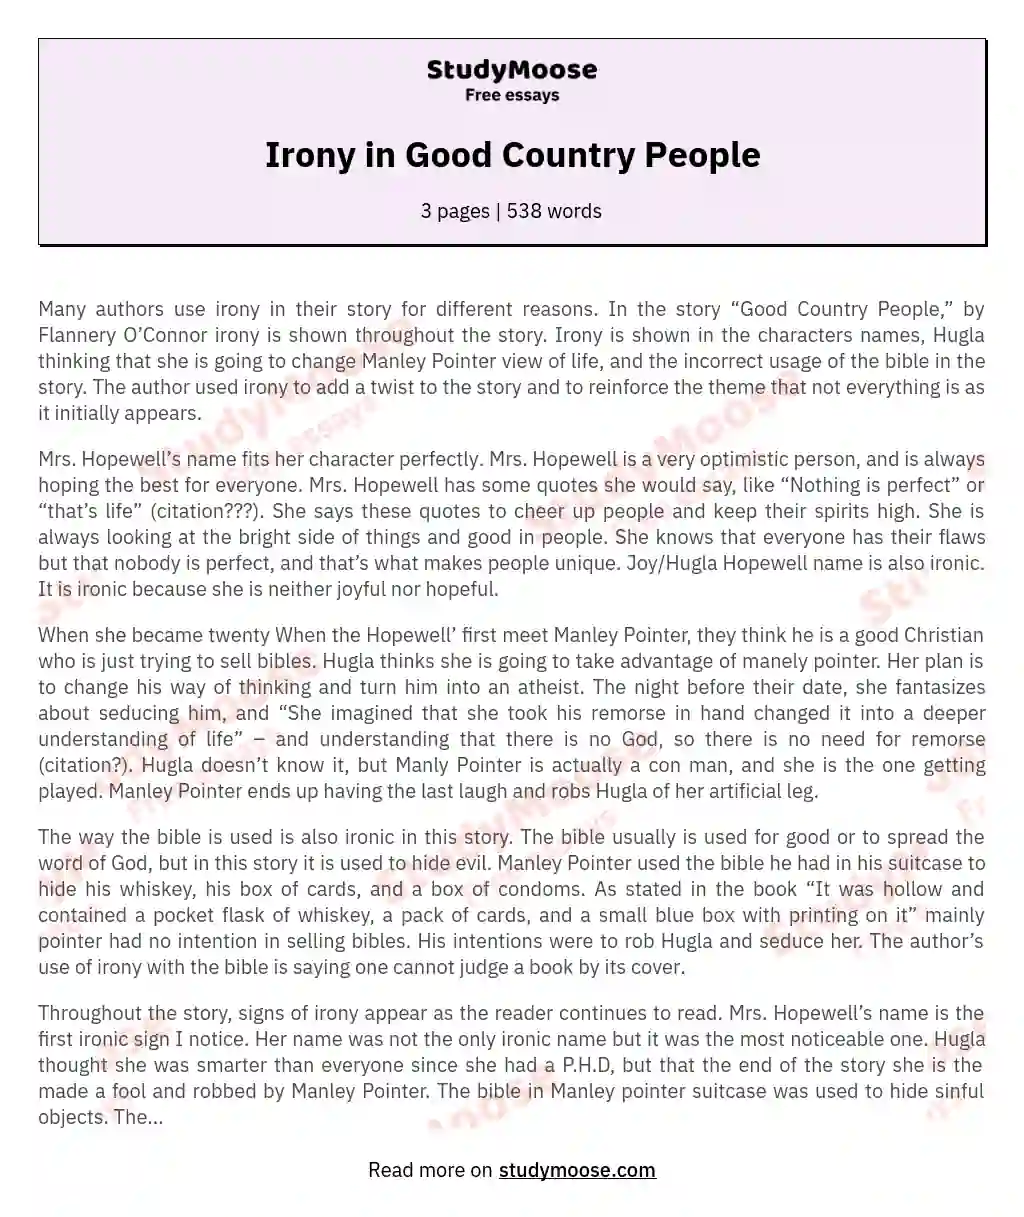 Irony in Good Country People essay